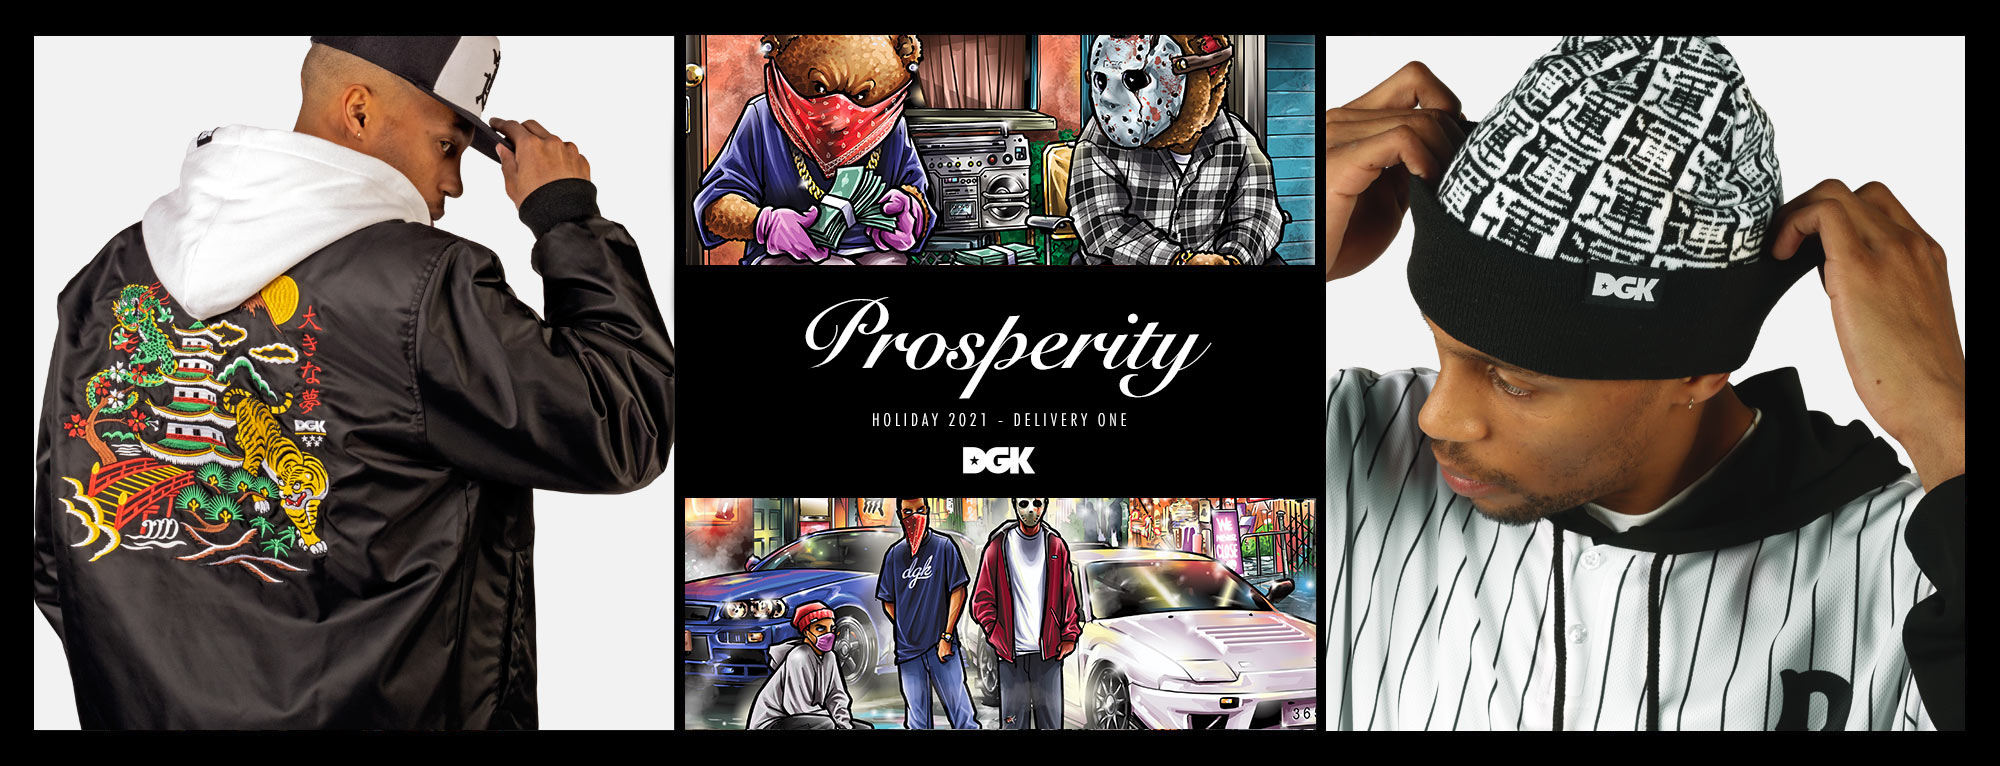 DGK Holiday 2021 Prosperity Collection